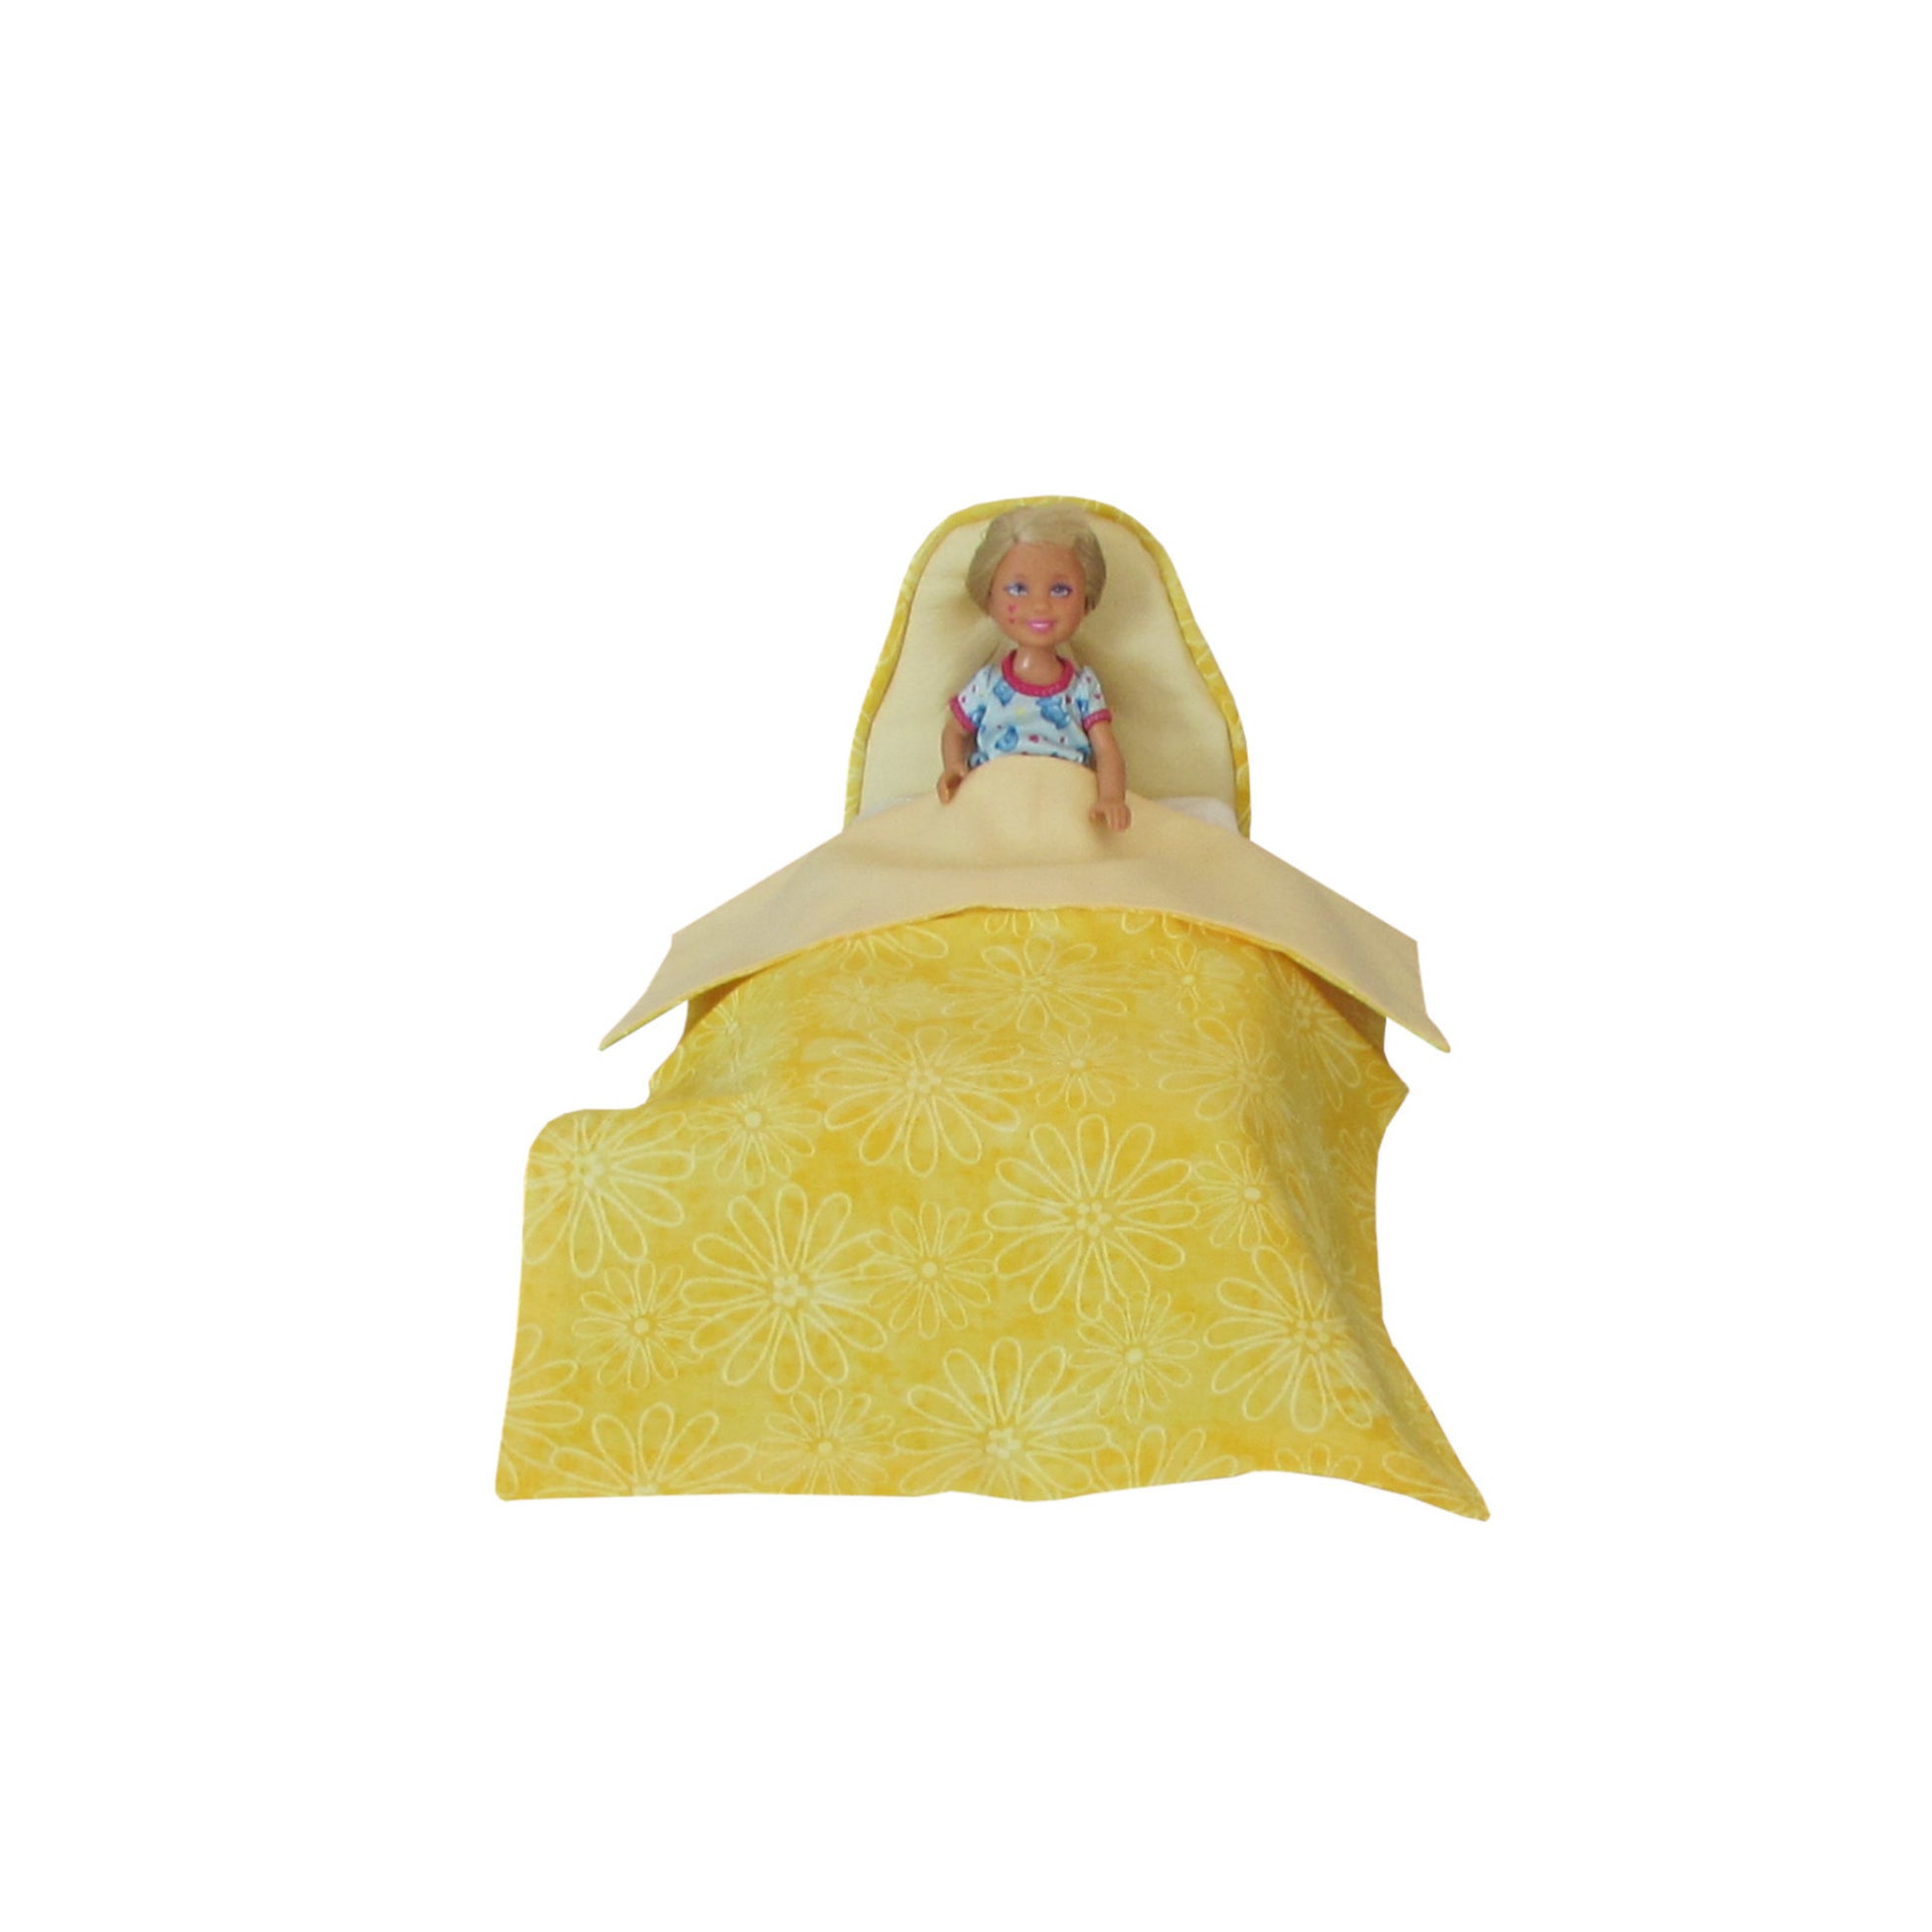 Light Yellow Doll Bed and Floral Bedding for 6.5-inch dolls with doll